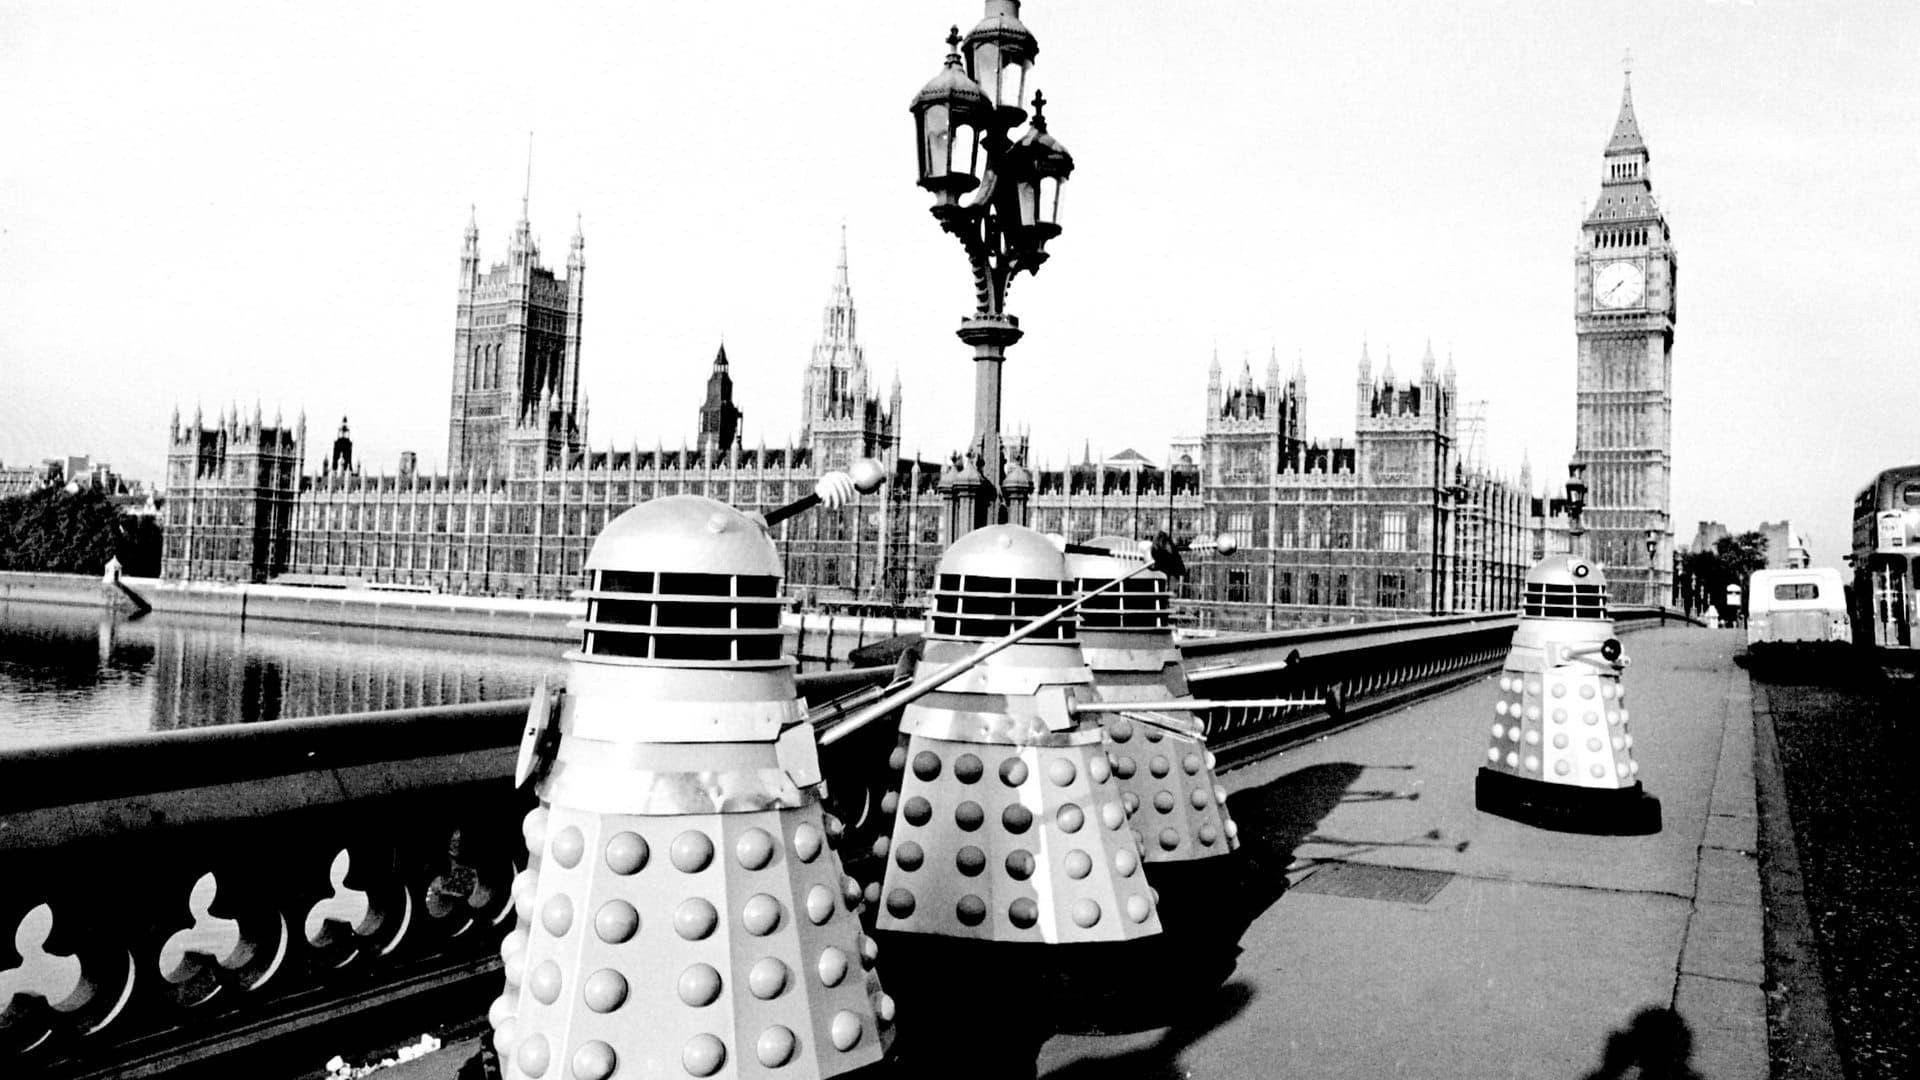 Doctor Who: The Dalek Invasion of Earth backdrop